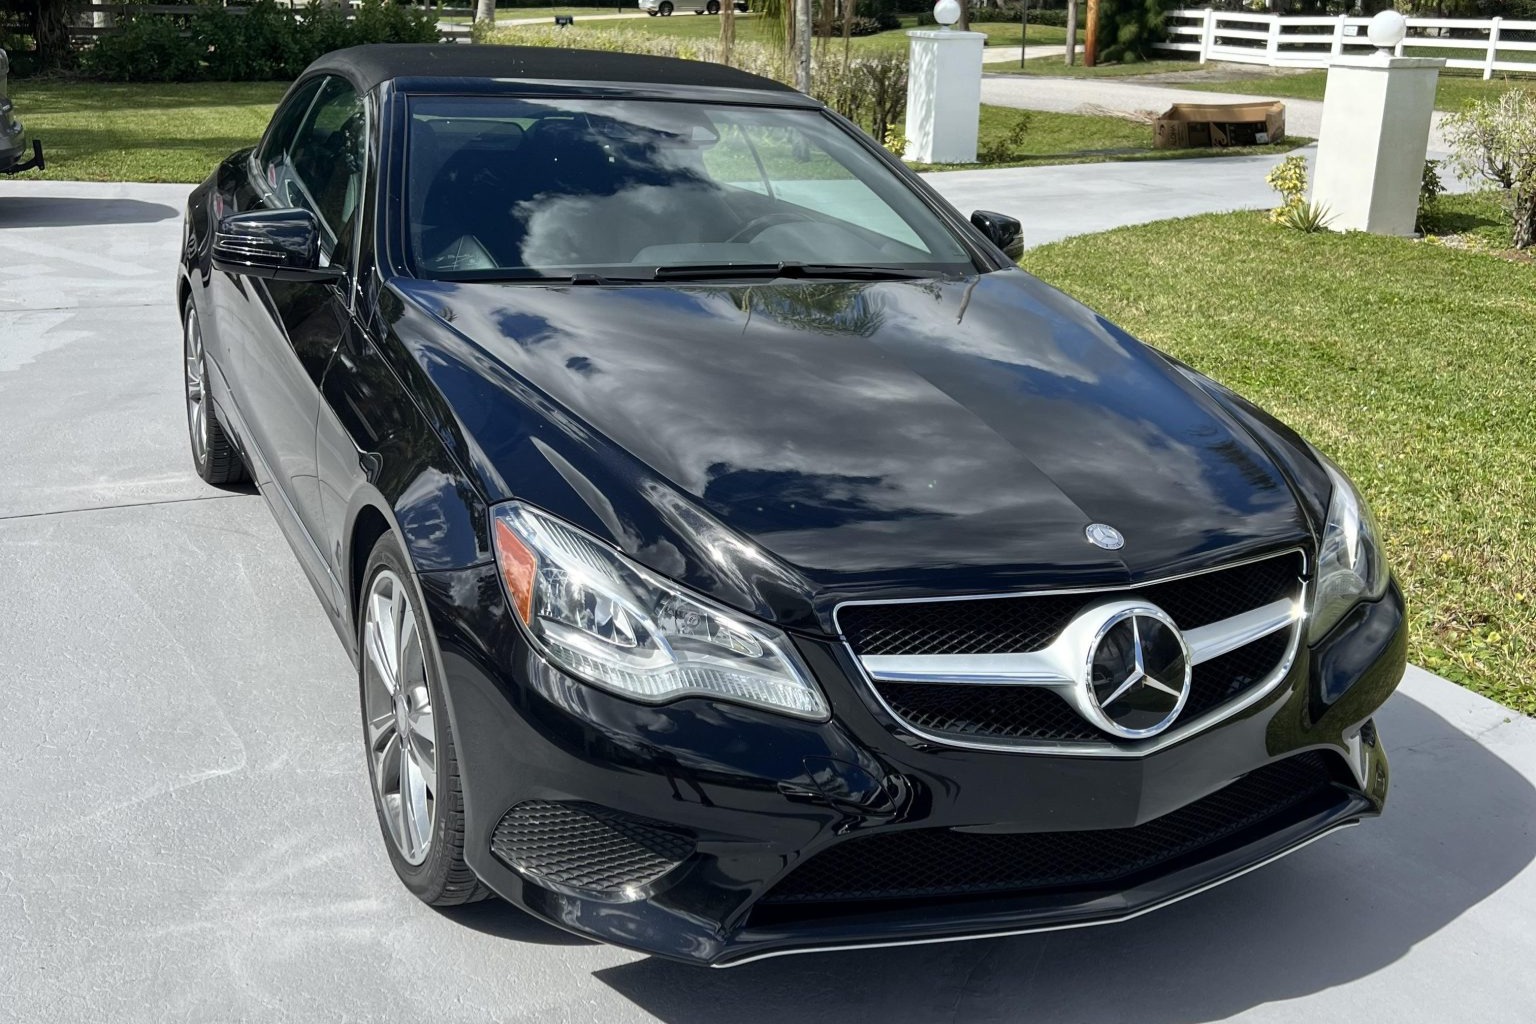 Used 14k-Mile 2014 Mercedes-Benz E350 Cabriolet Review